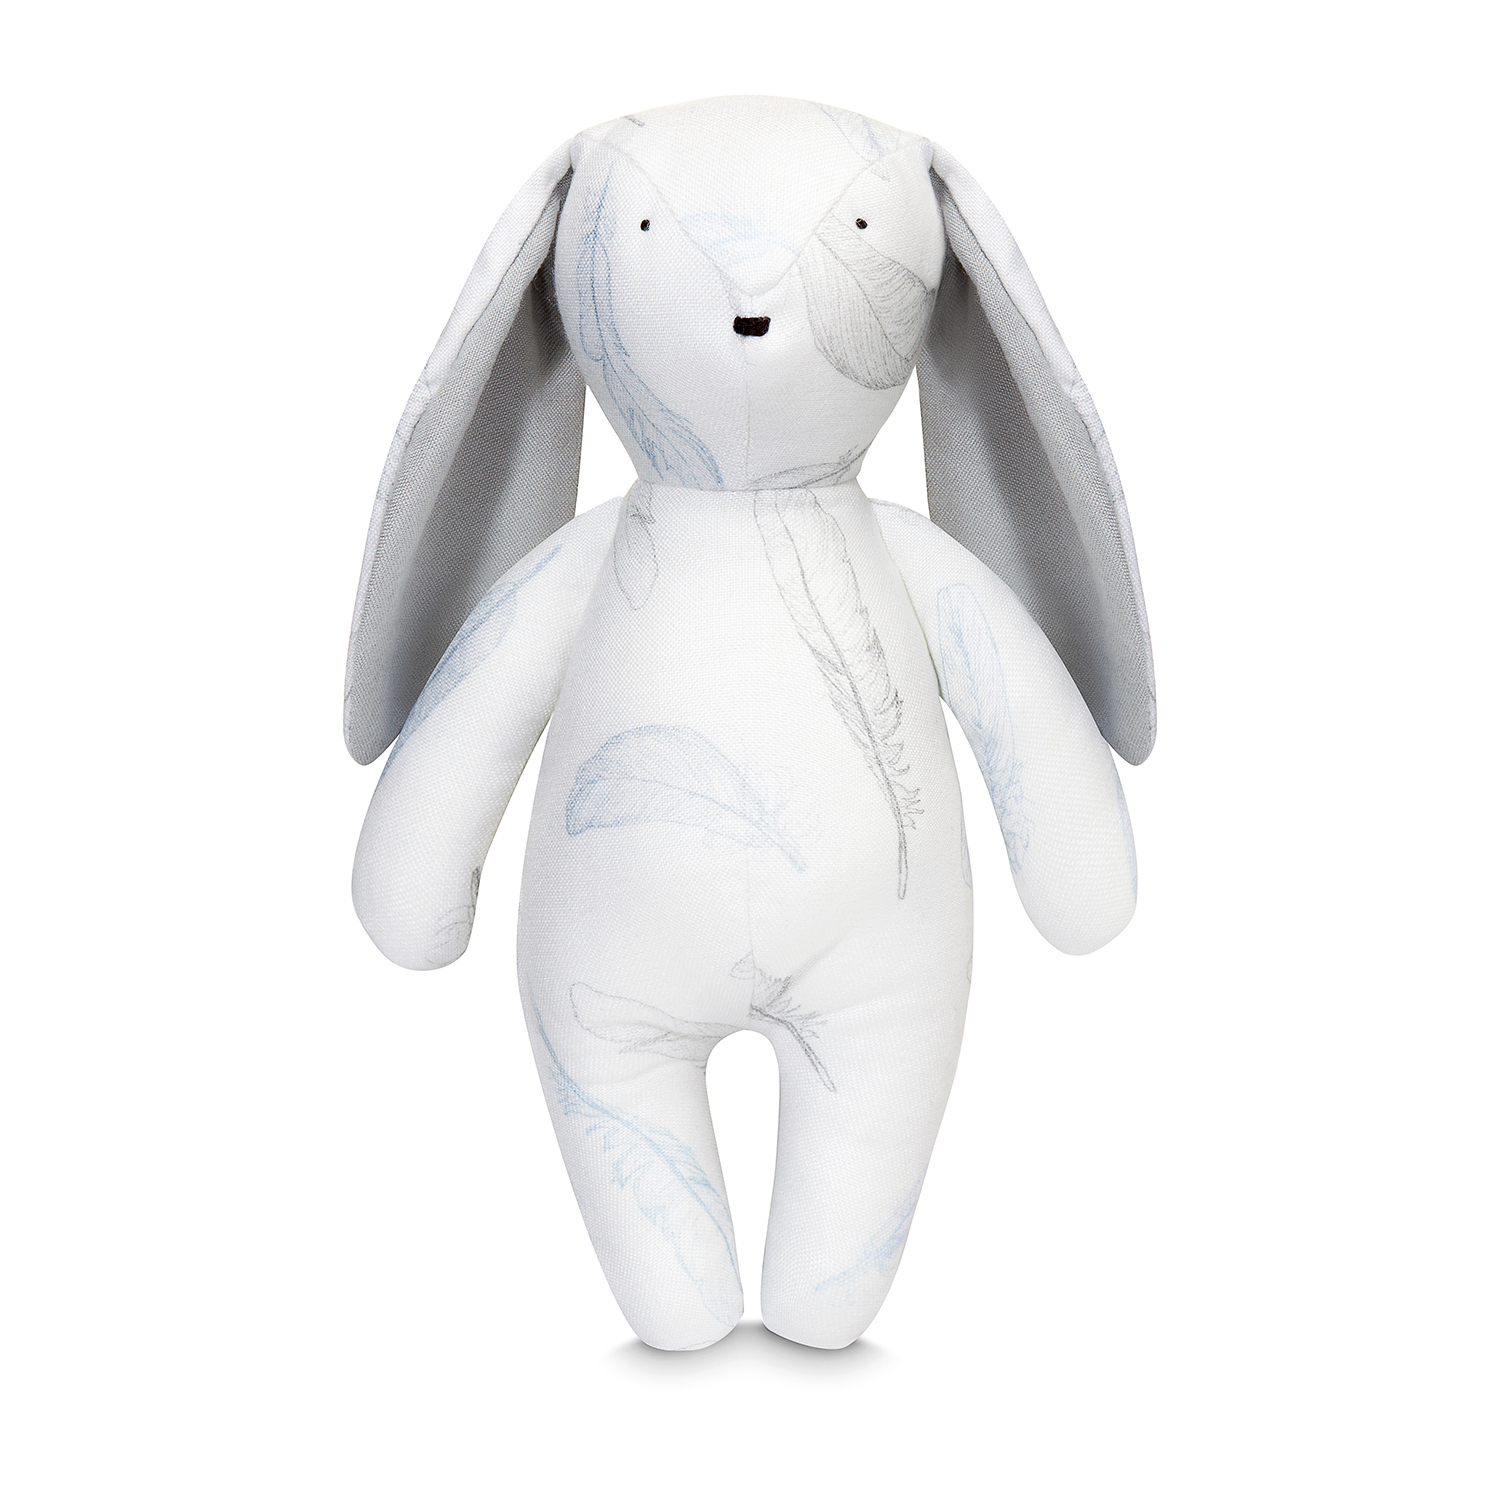 Bunio bunny soft toy - Heavenly feathers